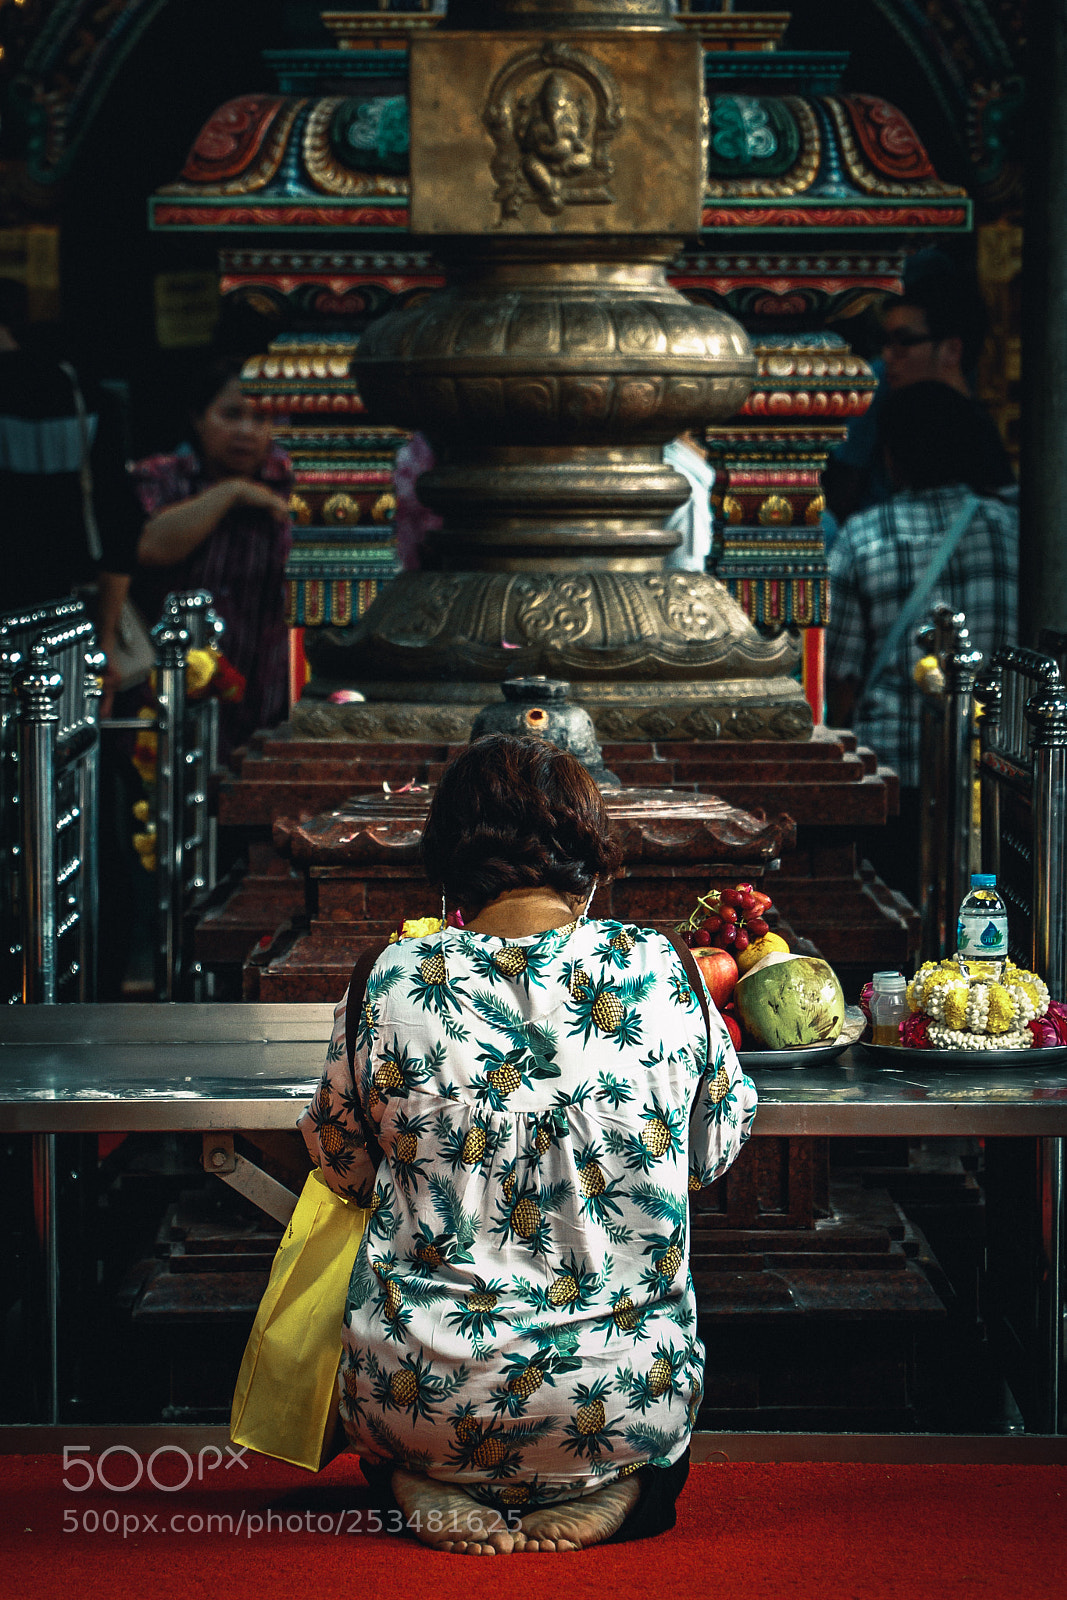 Sony a6500 sample photo. Old woman praying at photography